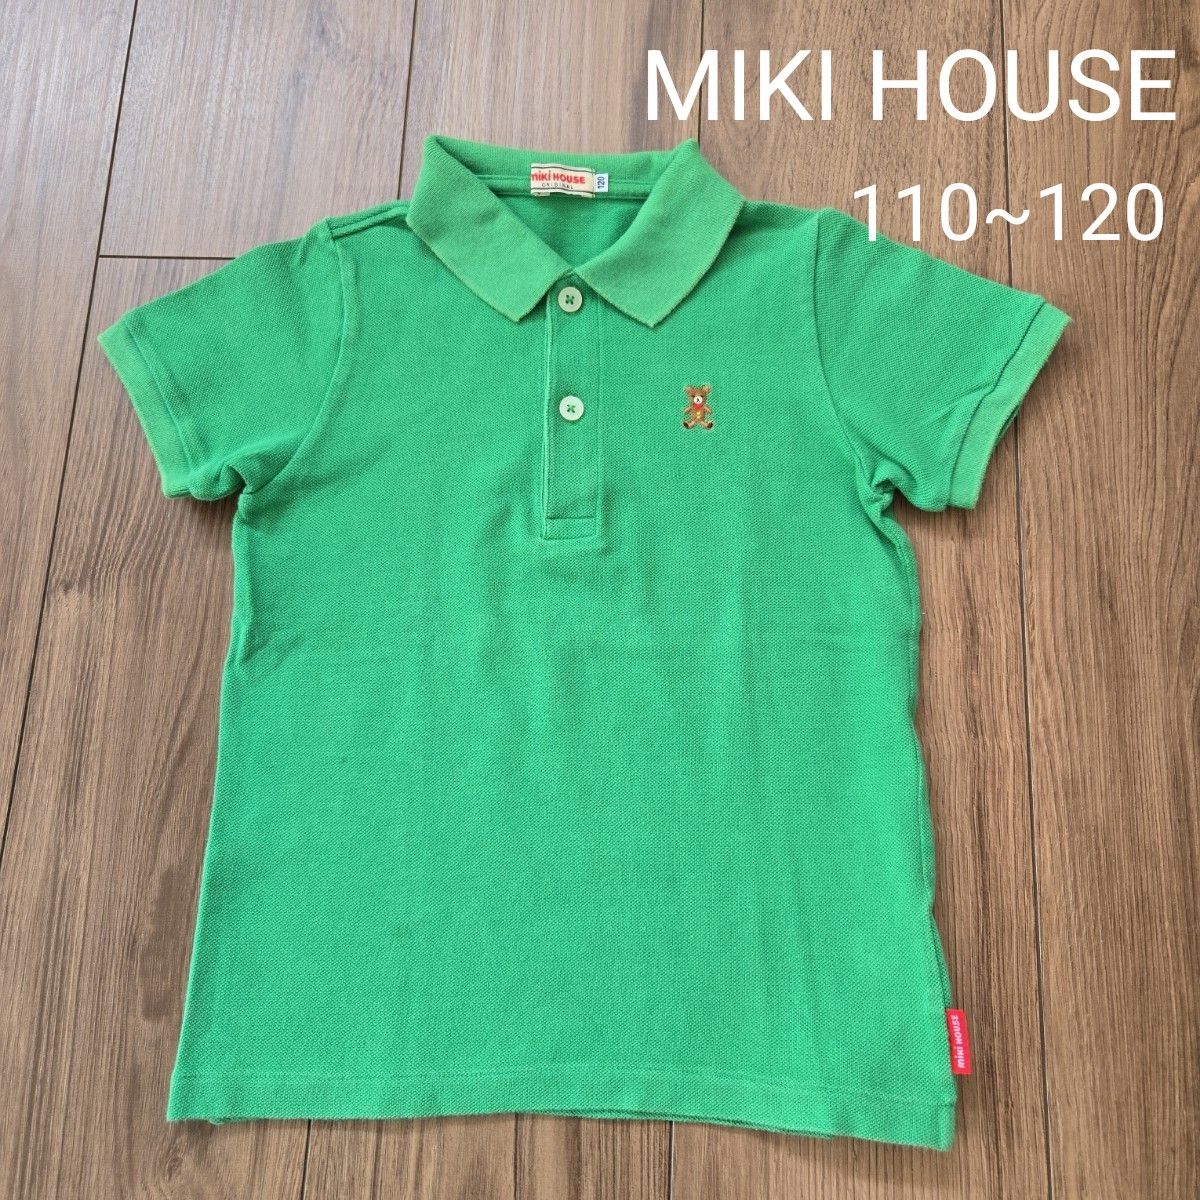 【MIKI HOUSE】半袖 ポロシャツ トップス